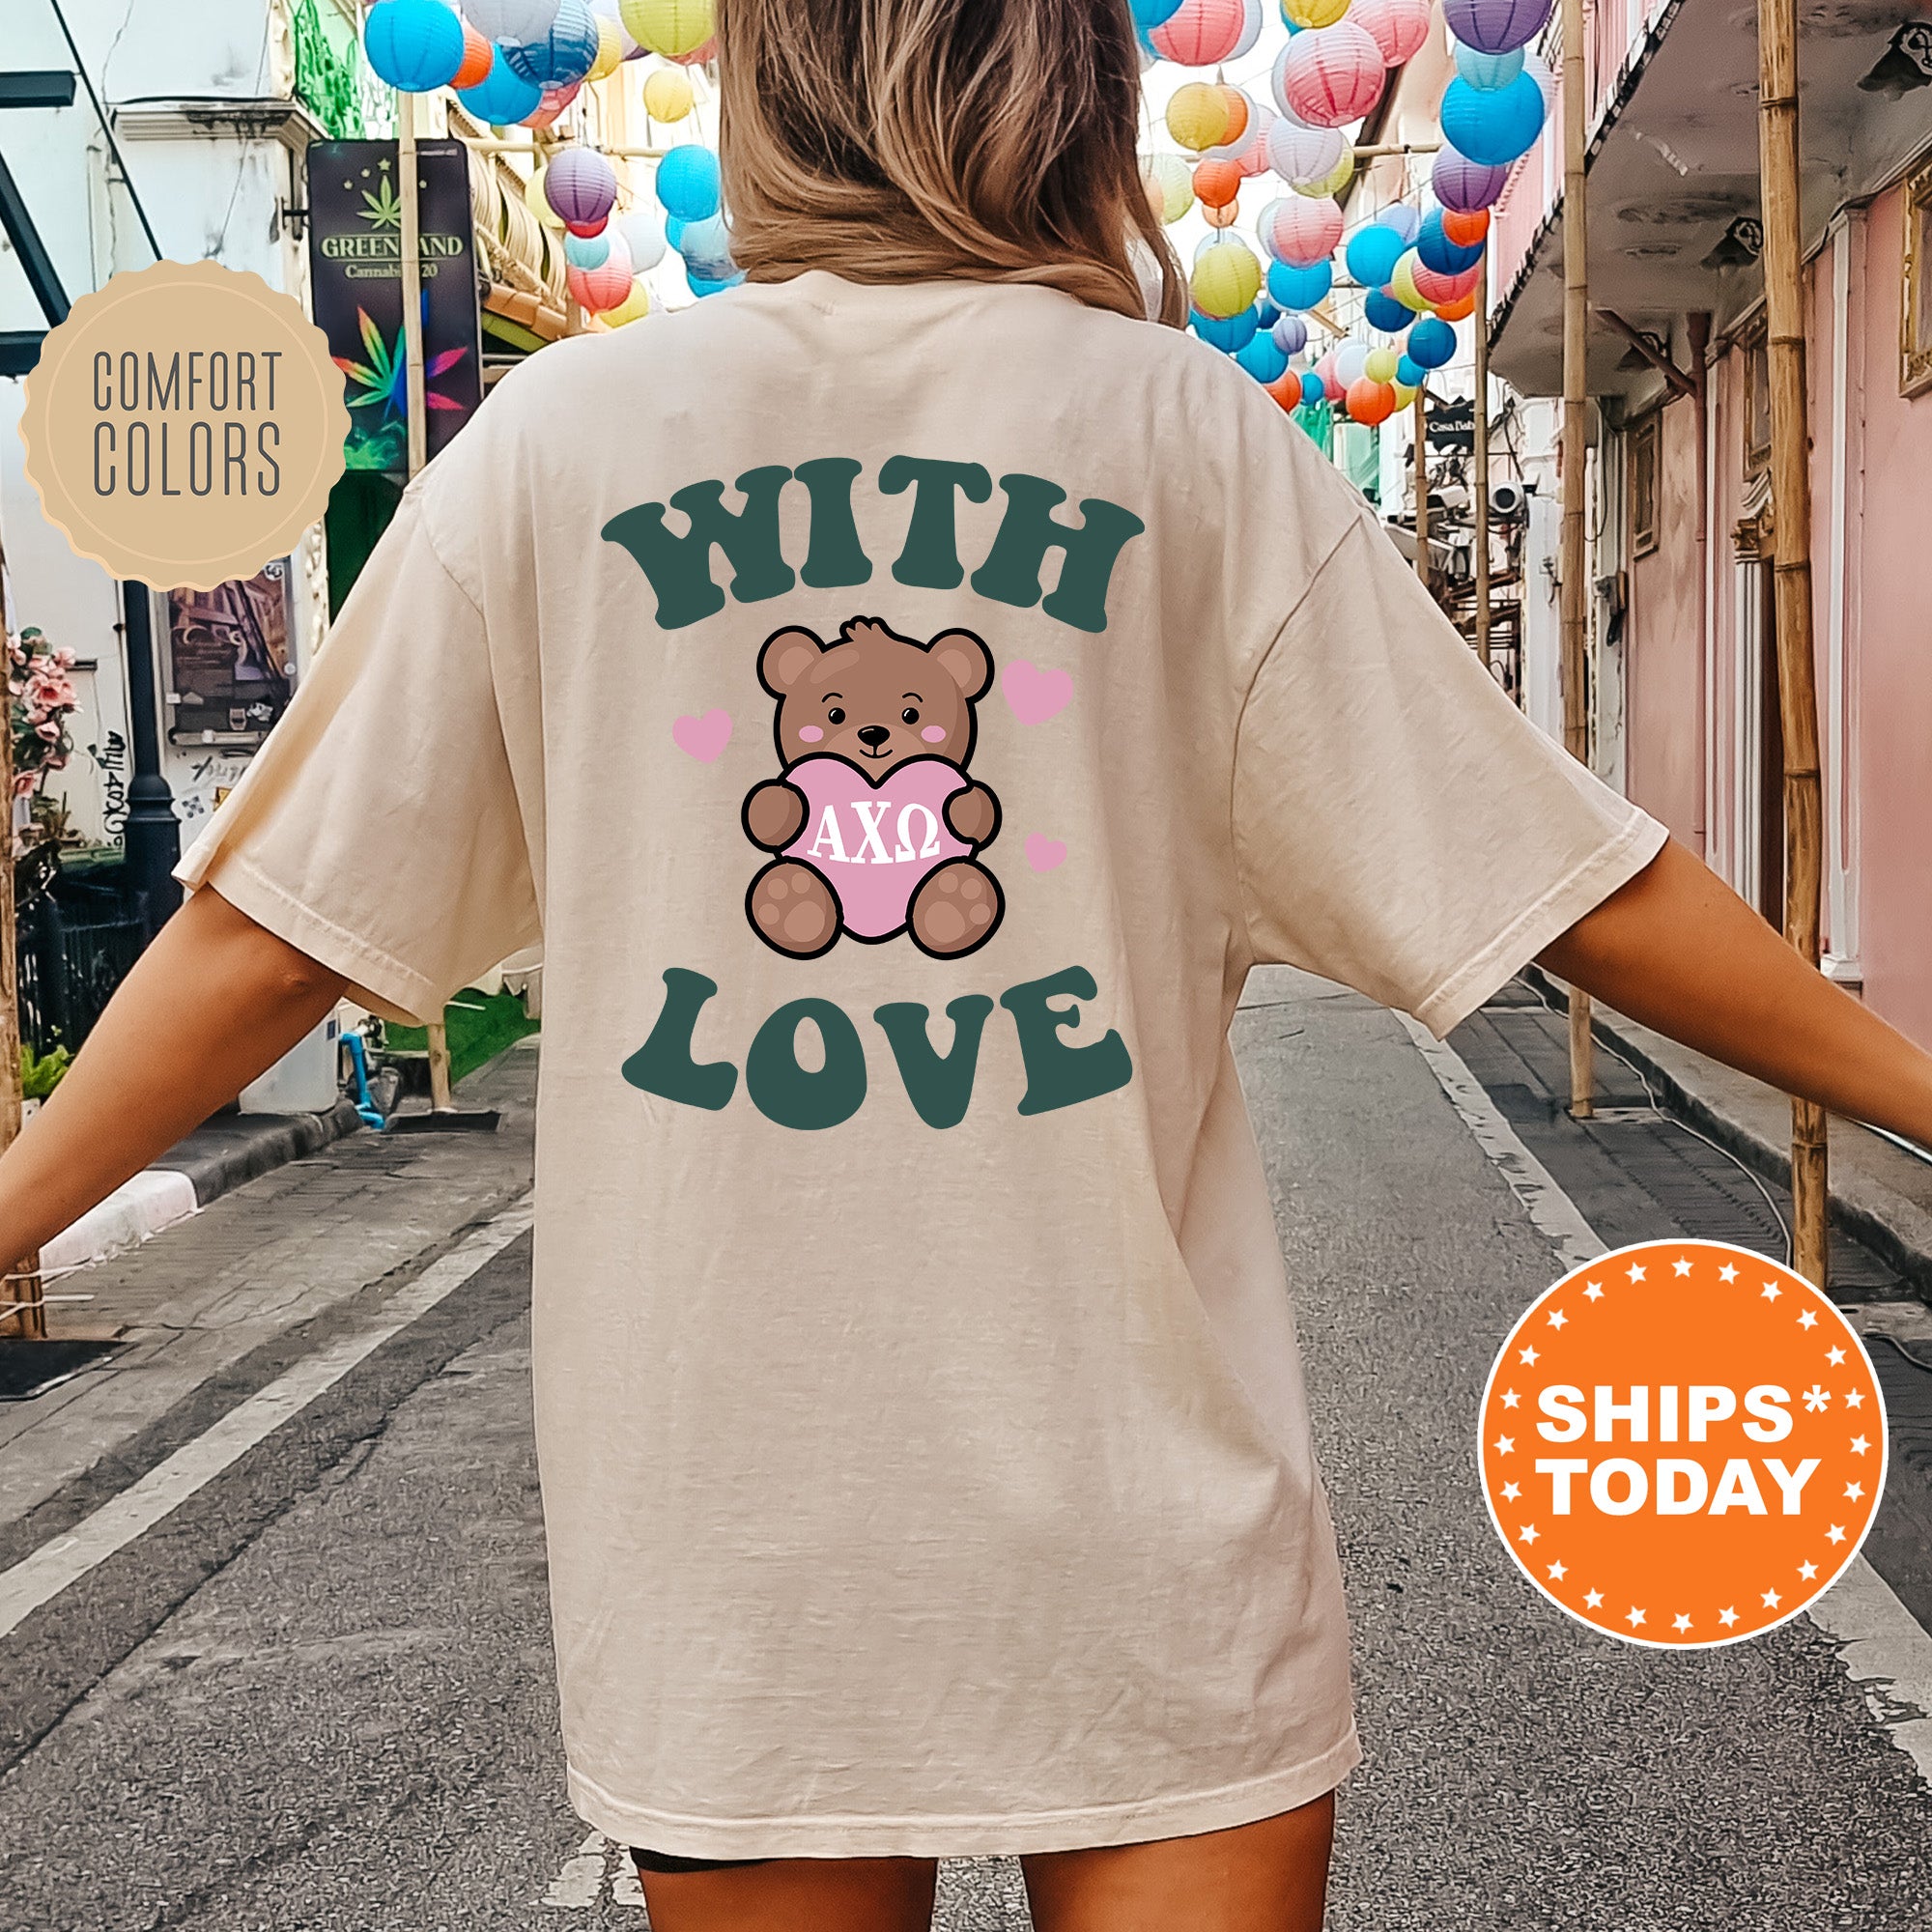 a woman walking down a street with a teddy bear on her shirt